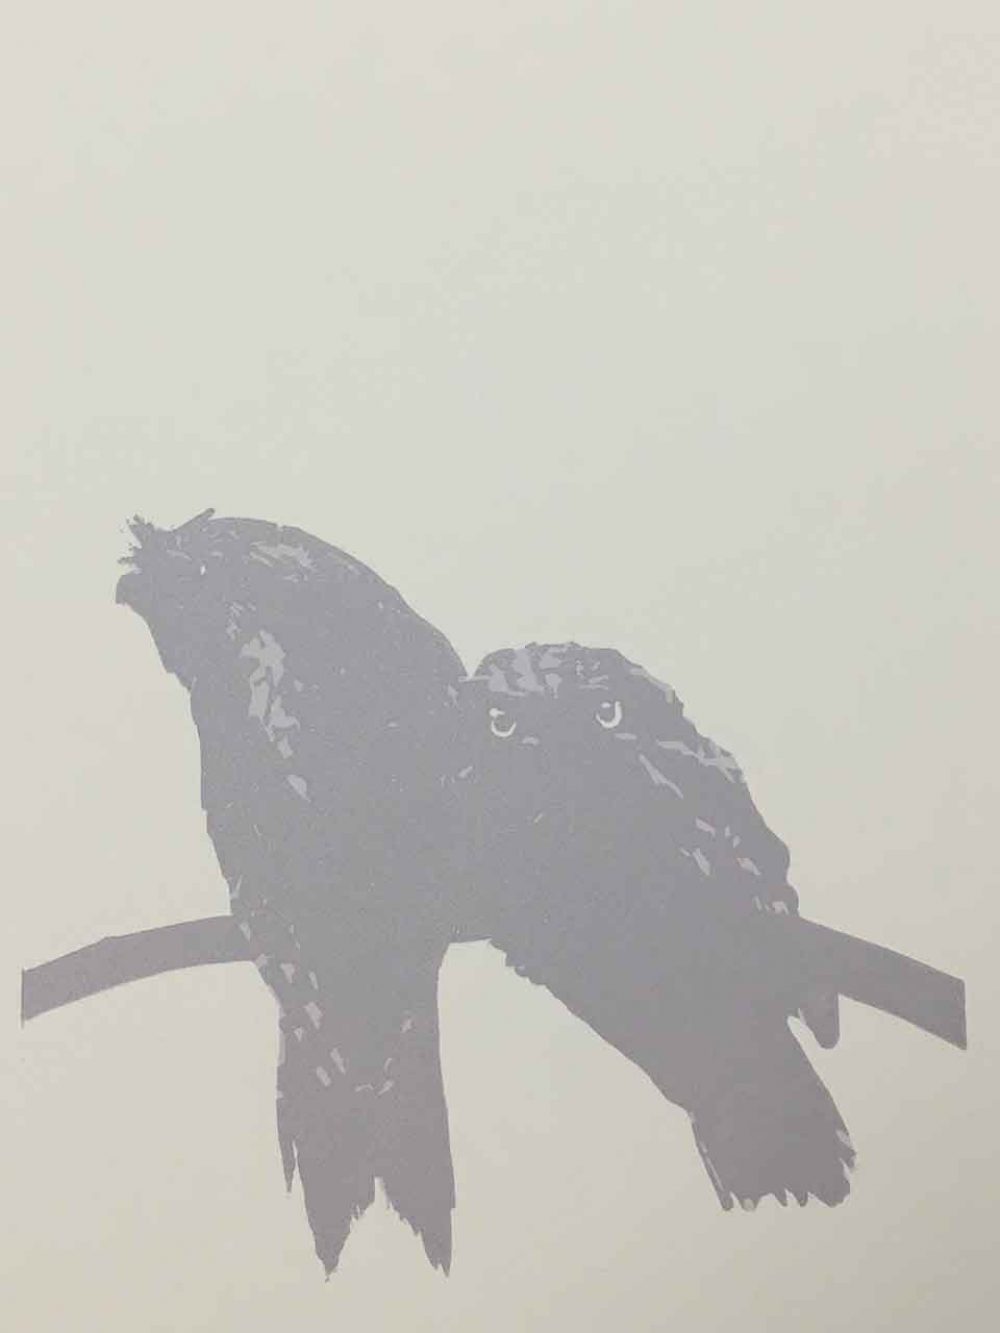 Tawny Frogmouth mother and chick reductive linoprint - 2nd colour